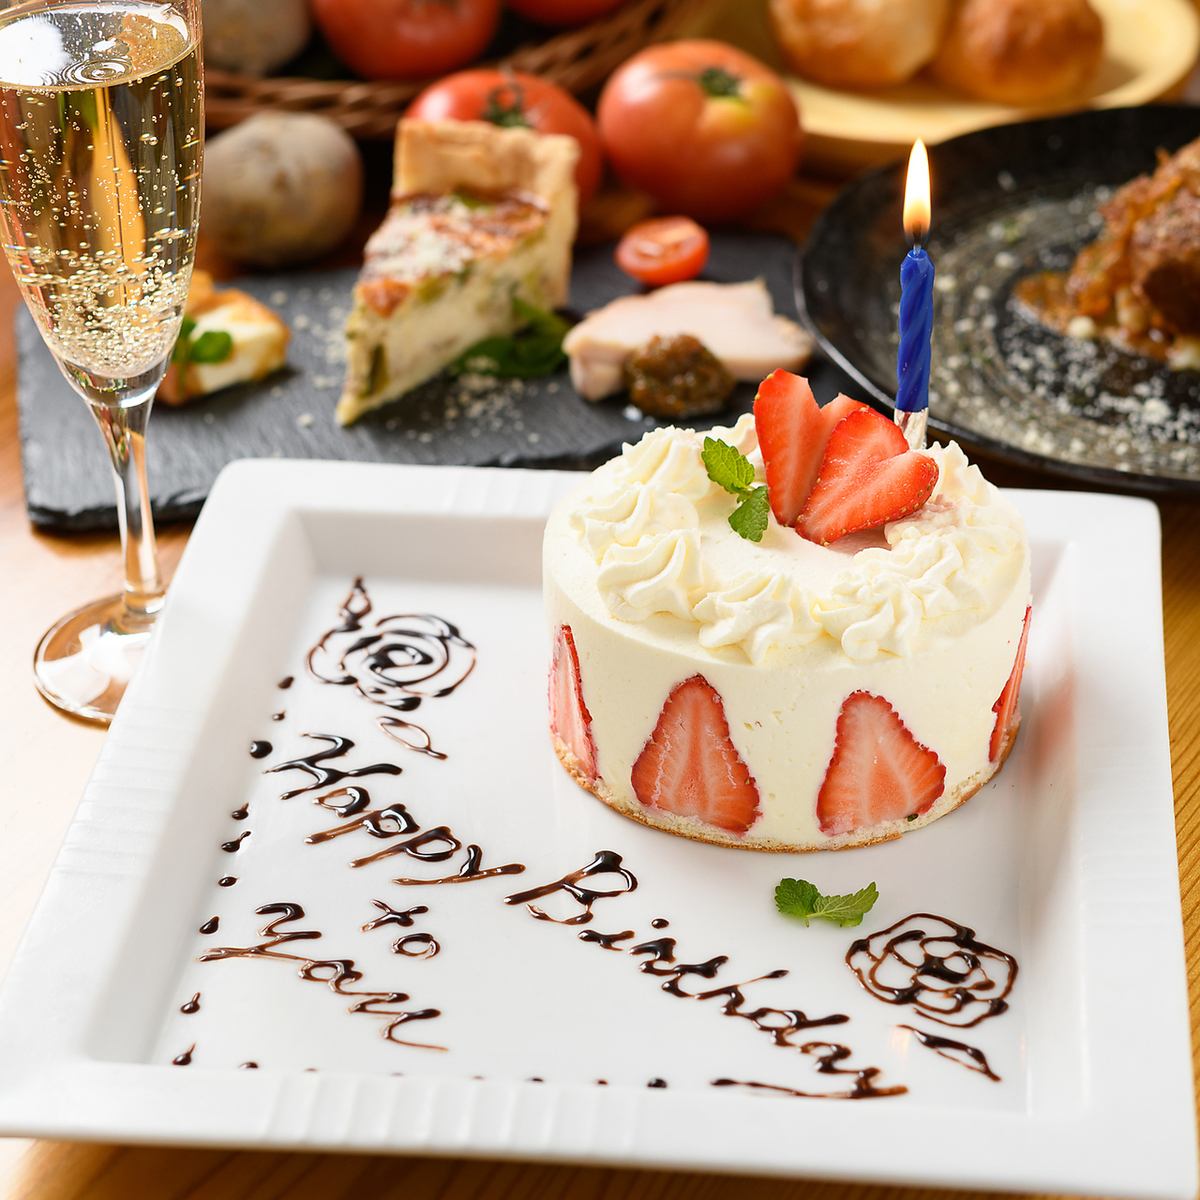 We have prepared an "anniversary course" that is perfect for celebrations♪